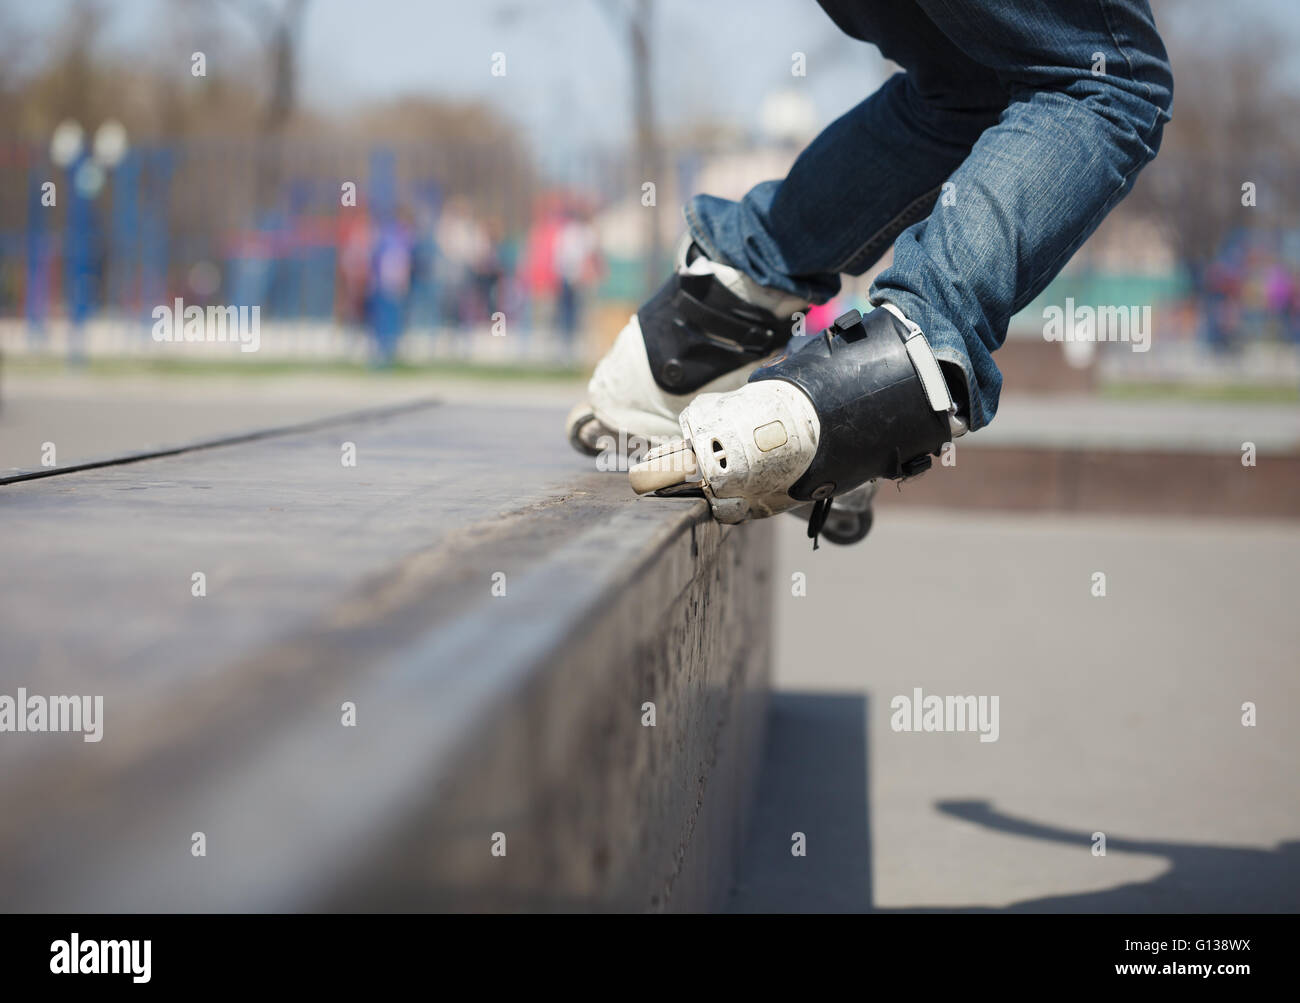 https://c8.alamy.com/comp/G138WX/rollerblader-grinding-on-rail-in-skate-park-outdoors-trick-is-called-G138WX.jpg